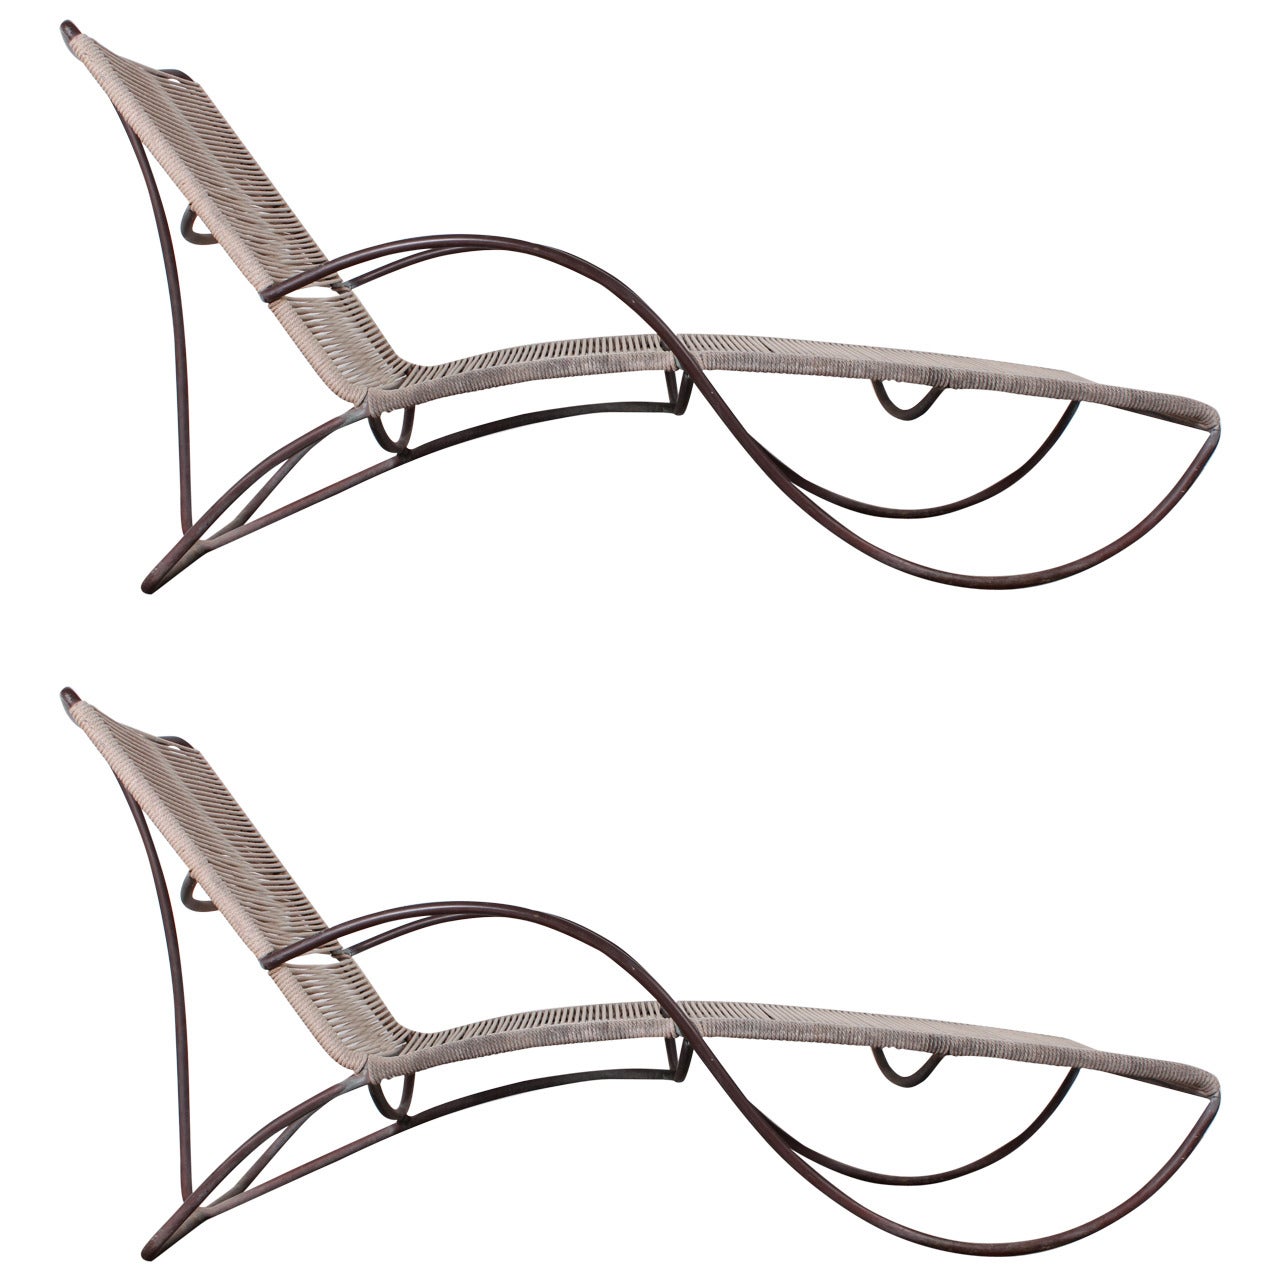 Pair of Bronze "S" Chaise Longue Chairs by Walter Lamb